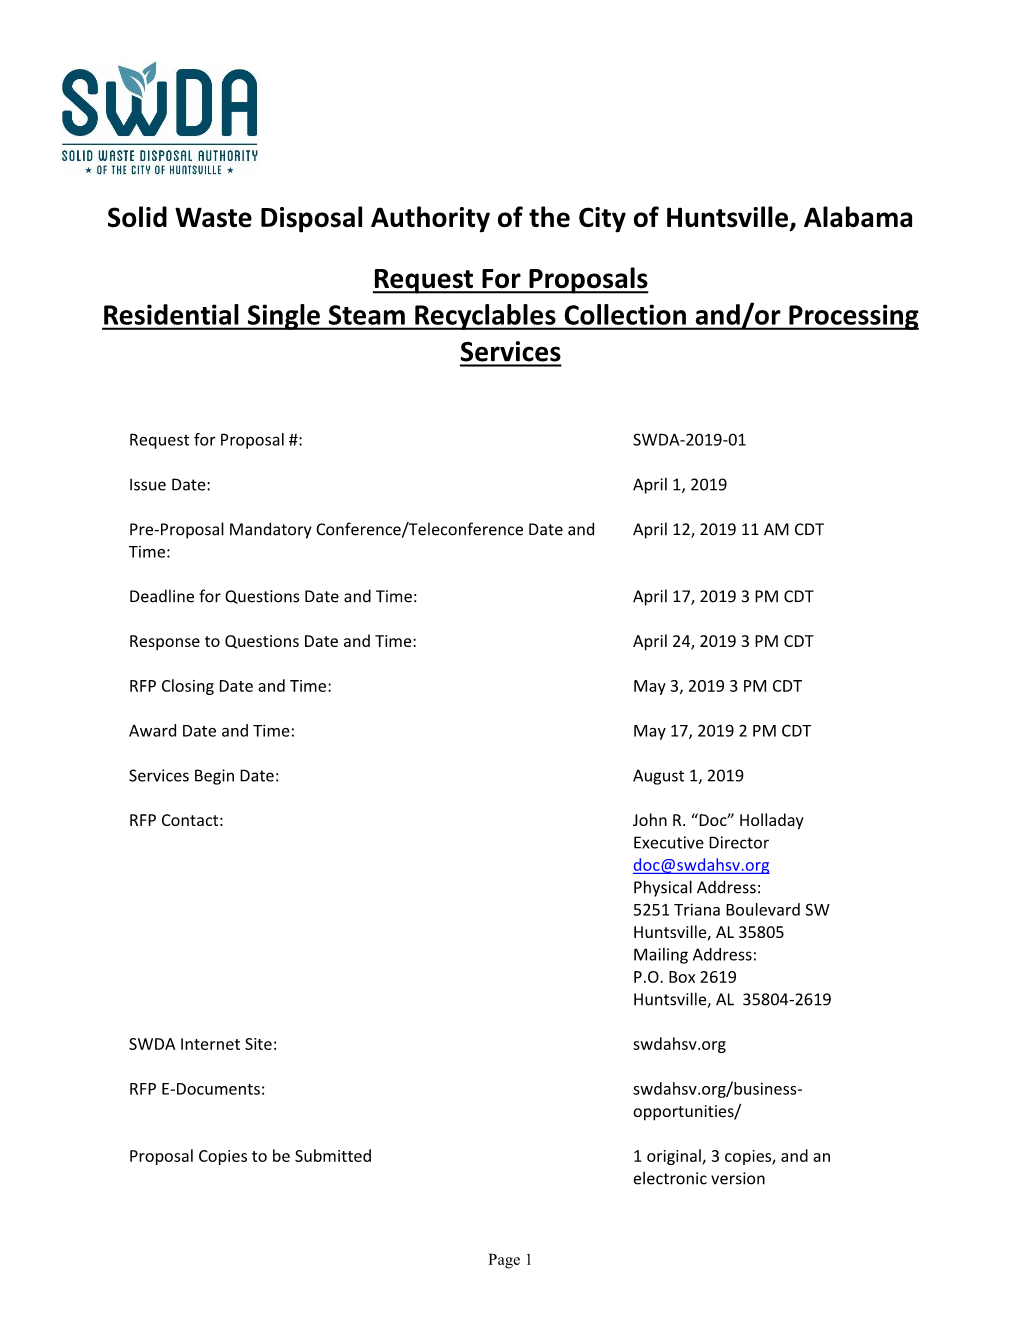 Solid Waste Disposal Authority of the City of Huntsville, Alabama Request